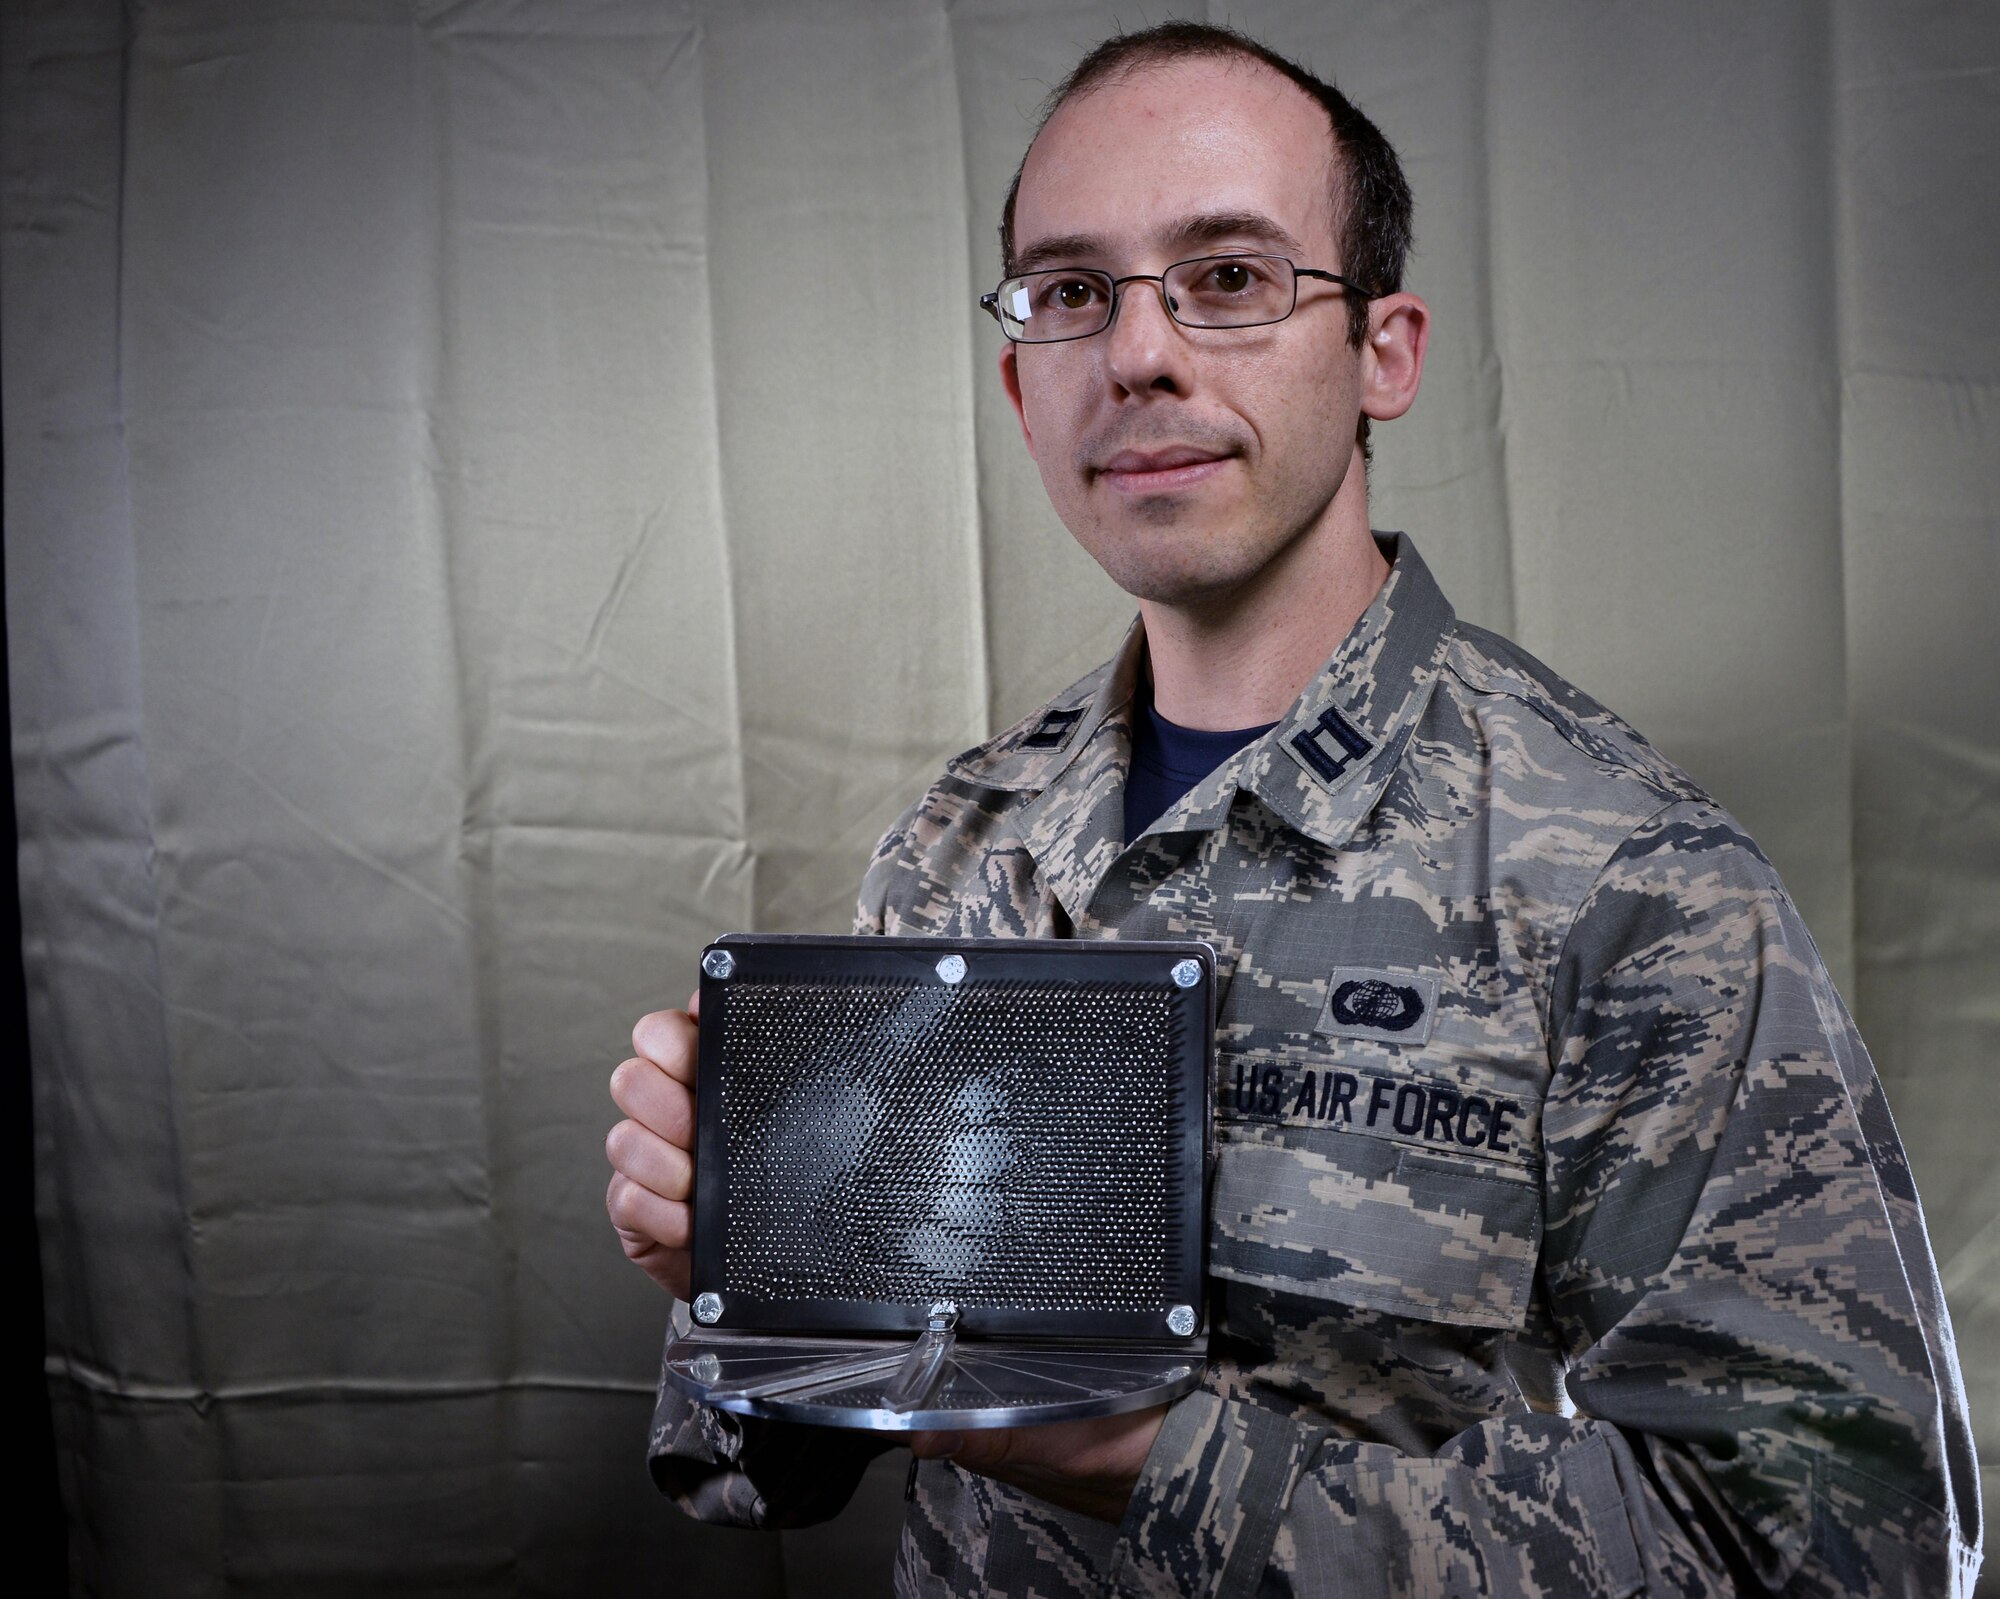 Capt. Daniel Stambovsky, a physicist assigned to the 32nd Intelligence Squadron at Fort Meade, Maryland, recently received notification that two of patents from his previous assignment at the Air Force Research Laboratory in Rome, New York, have been processed and approved: the “Actuated Pin Antenna Reflector” and the “Radio Frequency Emissive Display Antenna and System for Controlling.” (U.S. Air Force photo/Staff Sgt. Alexandre Montes)